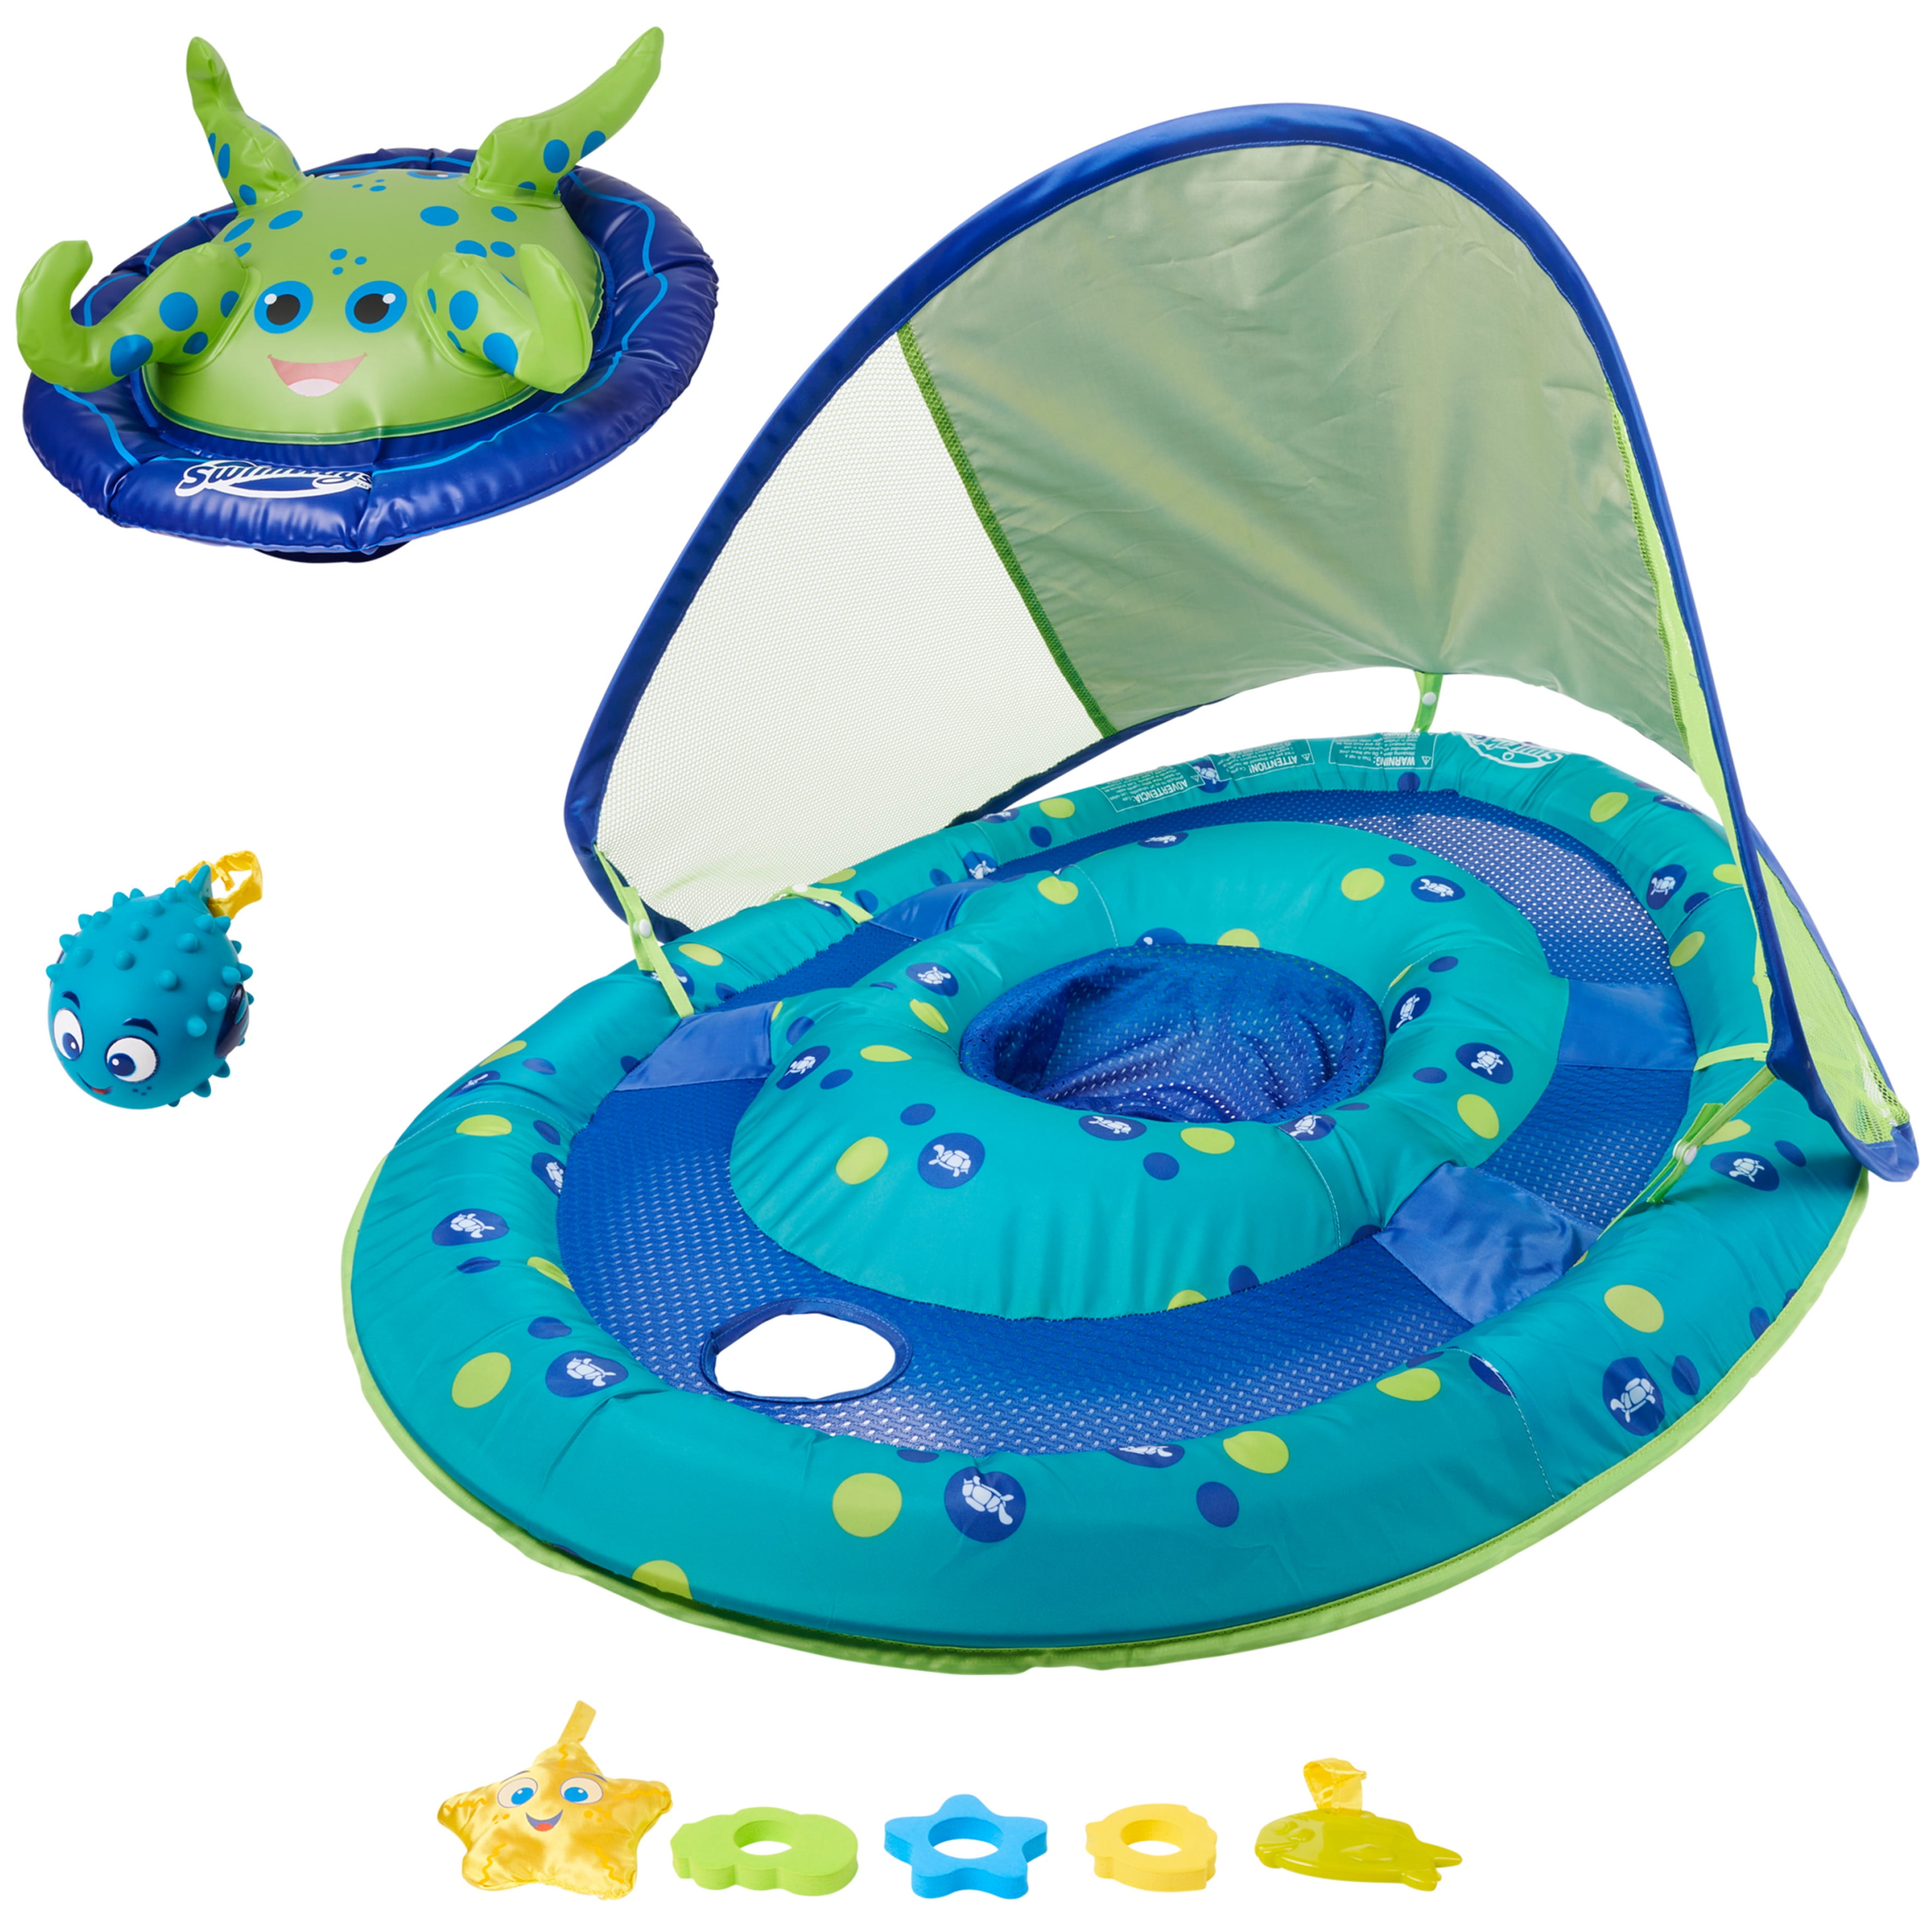 SwimWays Baby Spring Float Activity Center, Inflatable Float for Baby Boys, Blue/Green - image 5 of 8